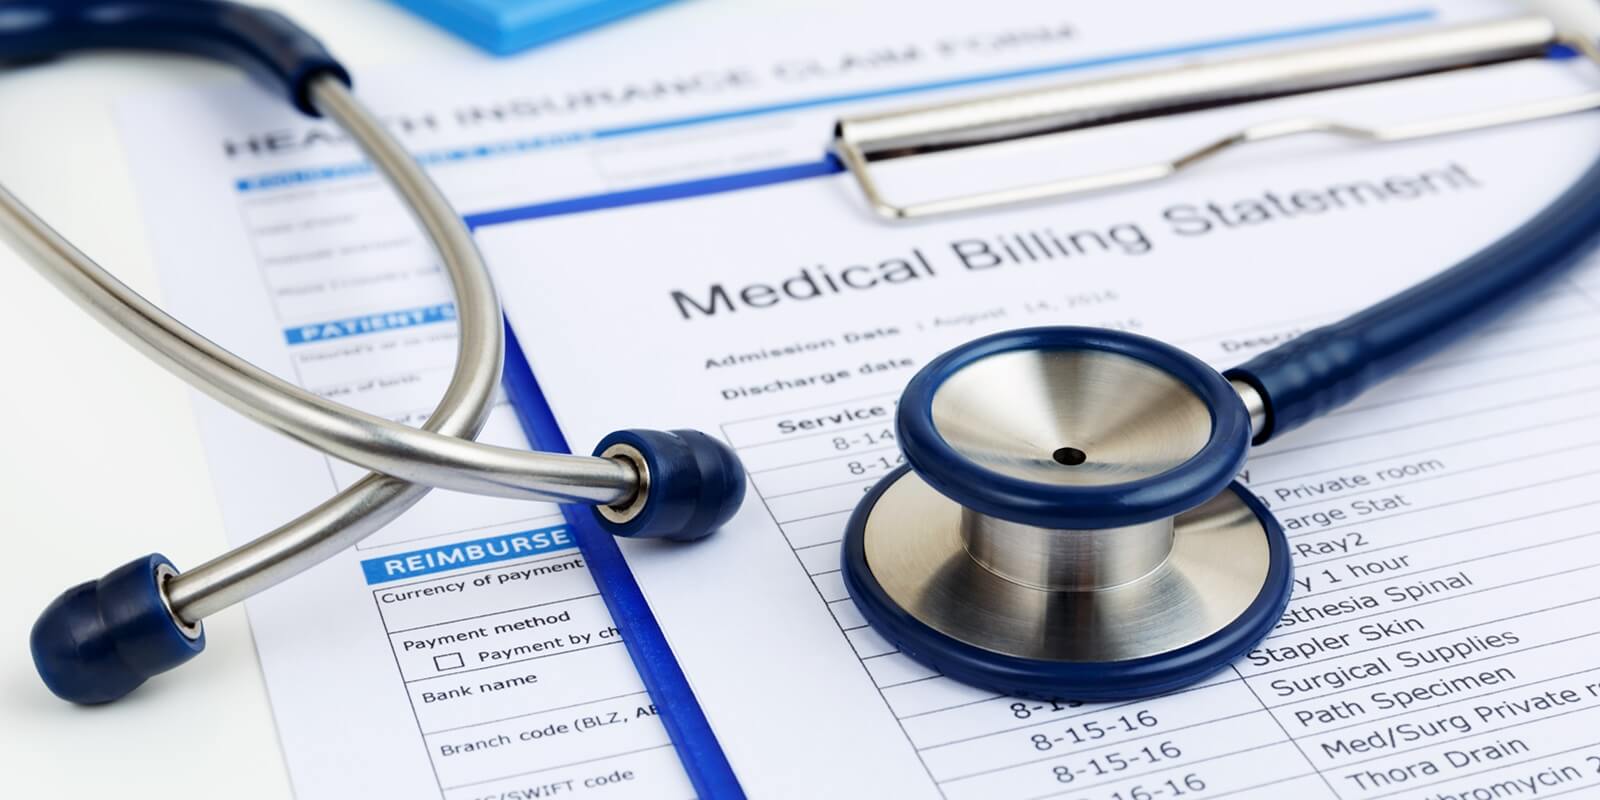 stethoscope on medical bills and health insurance claim form